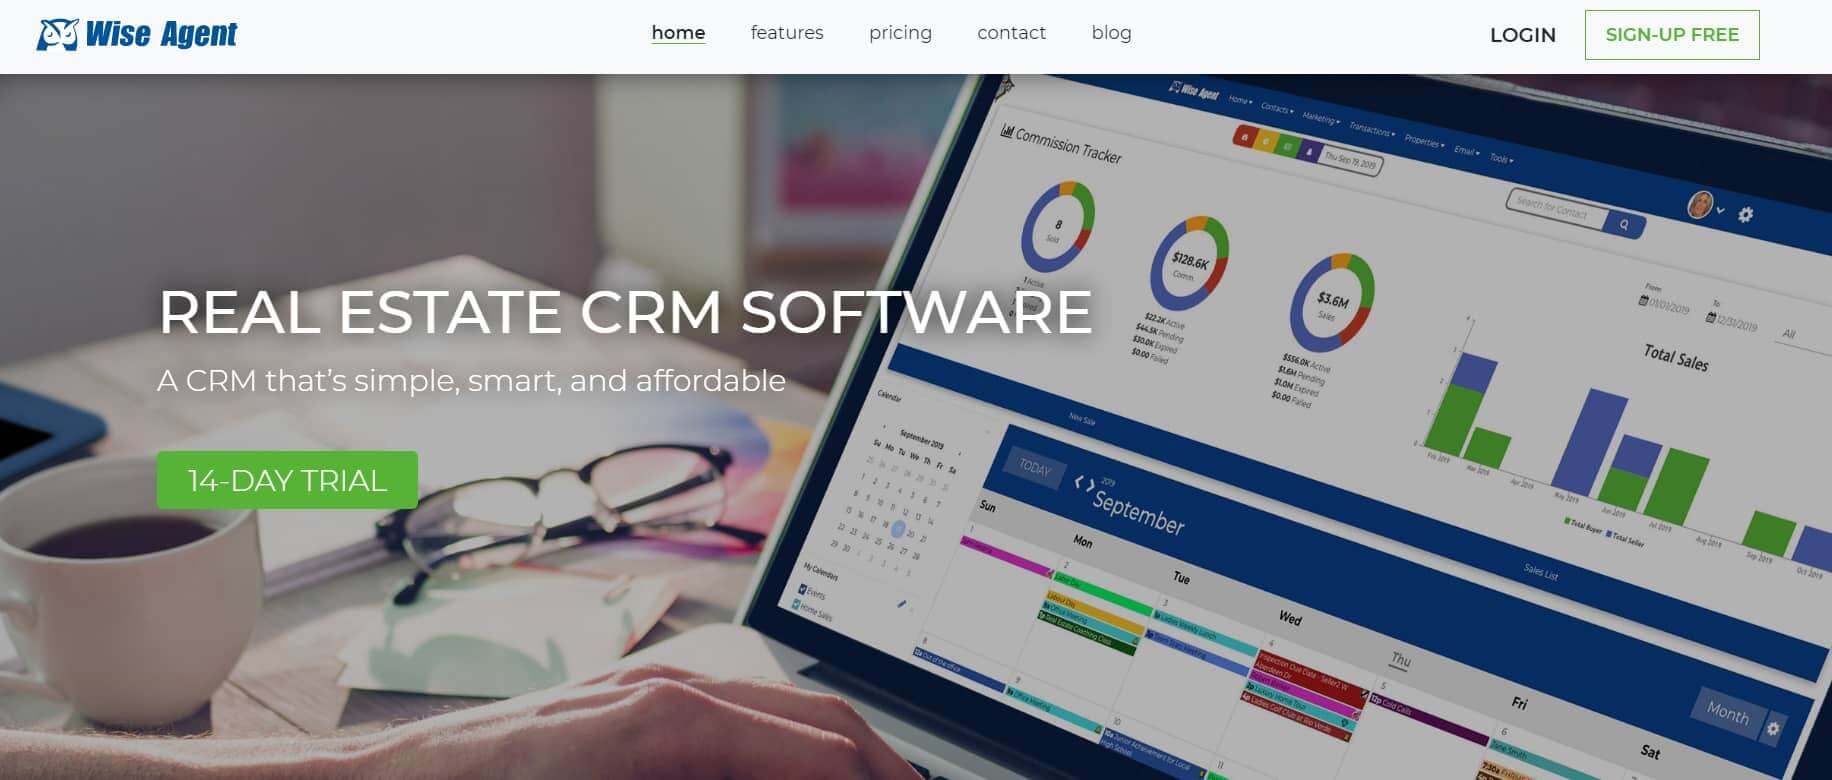 Wise-Agent-real-estate-crm-software